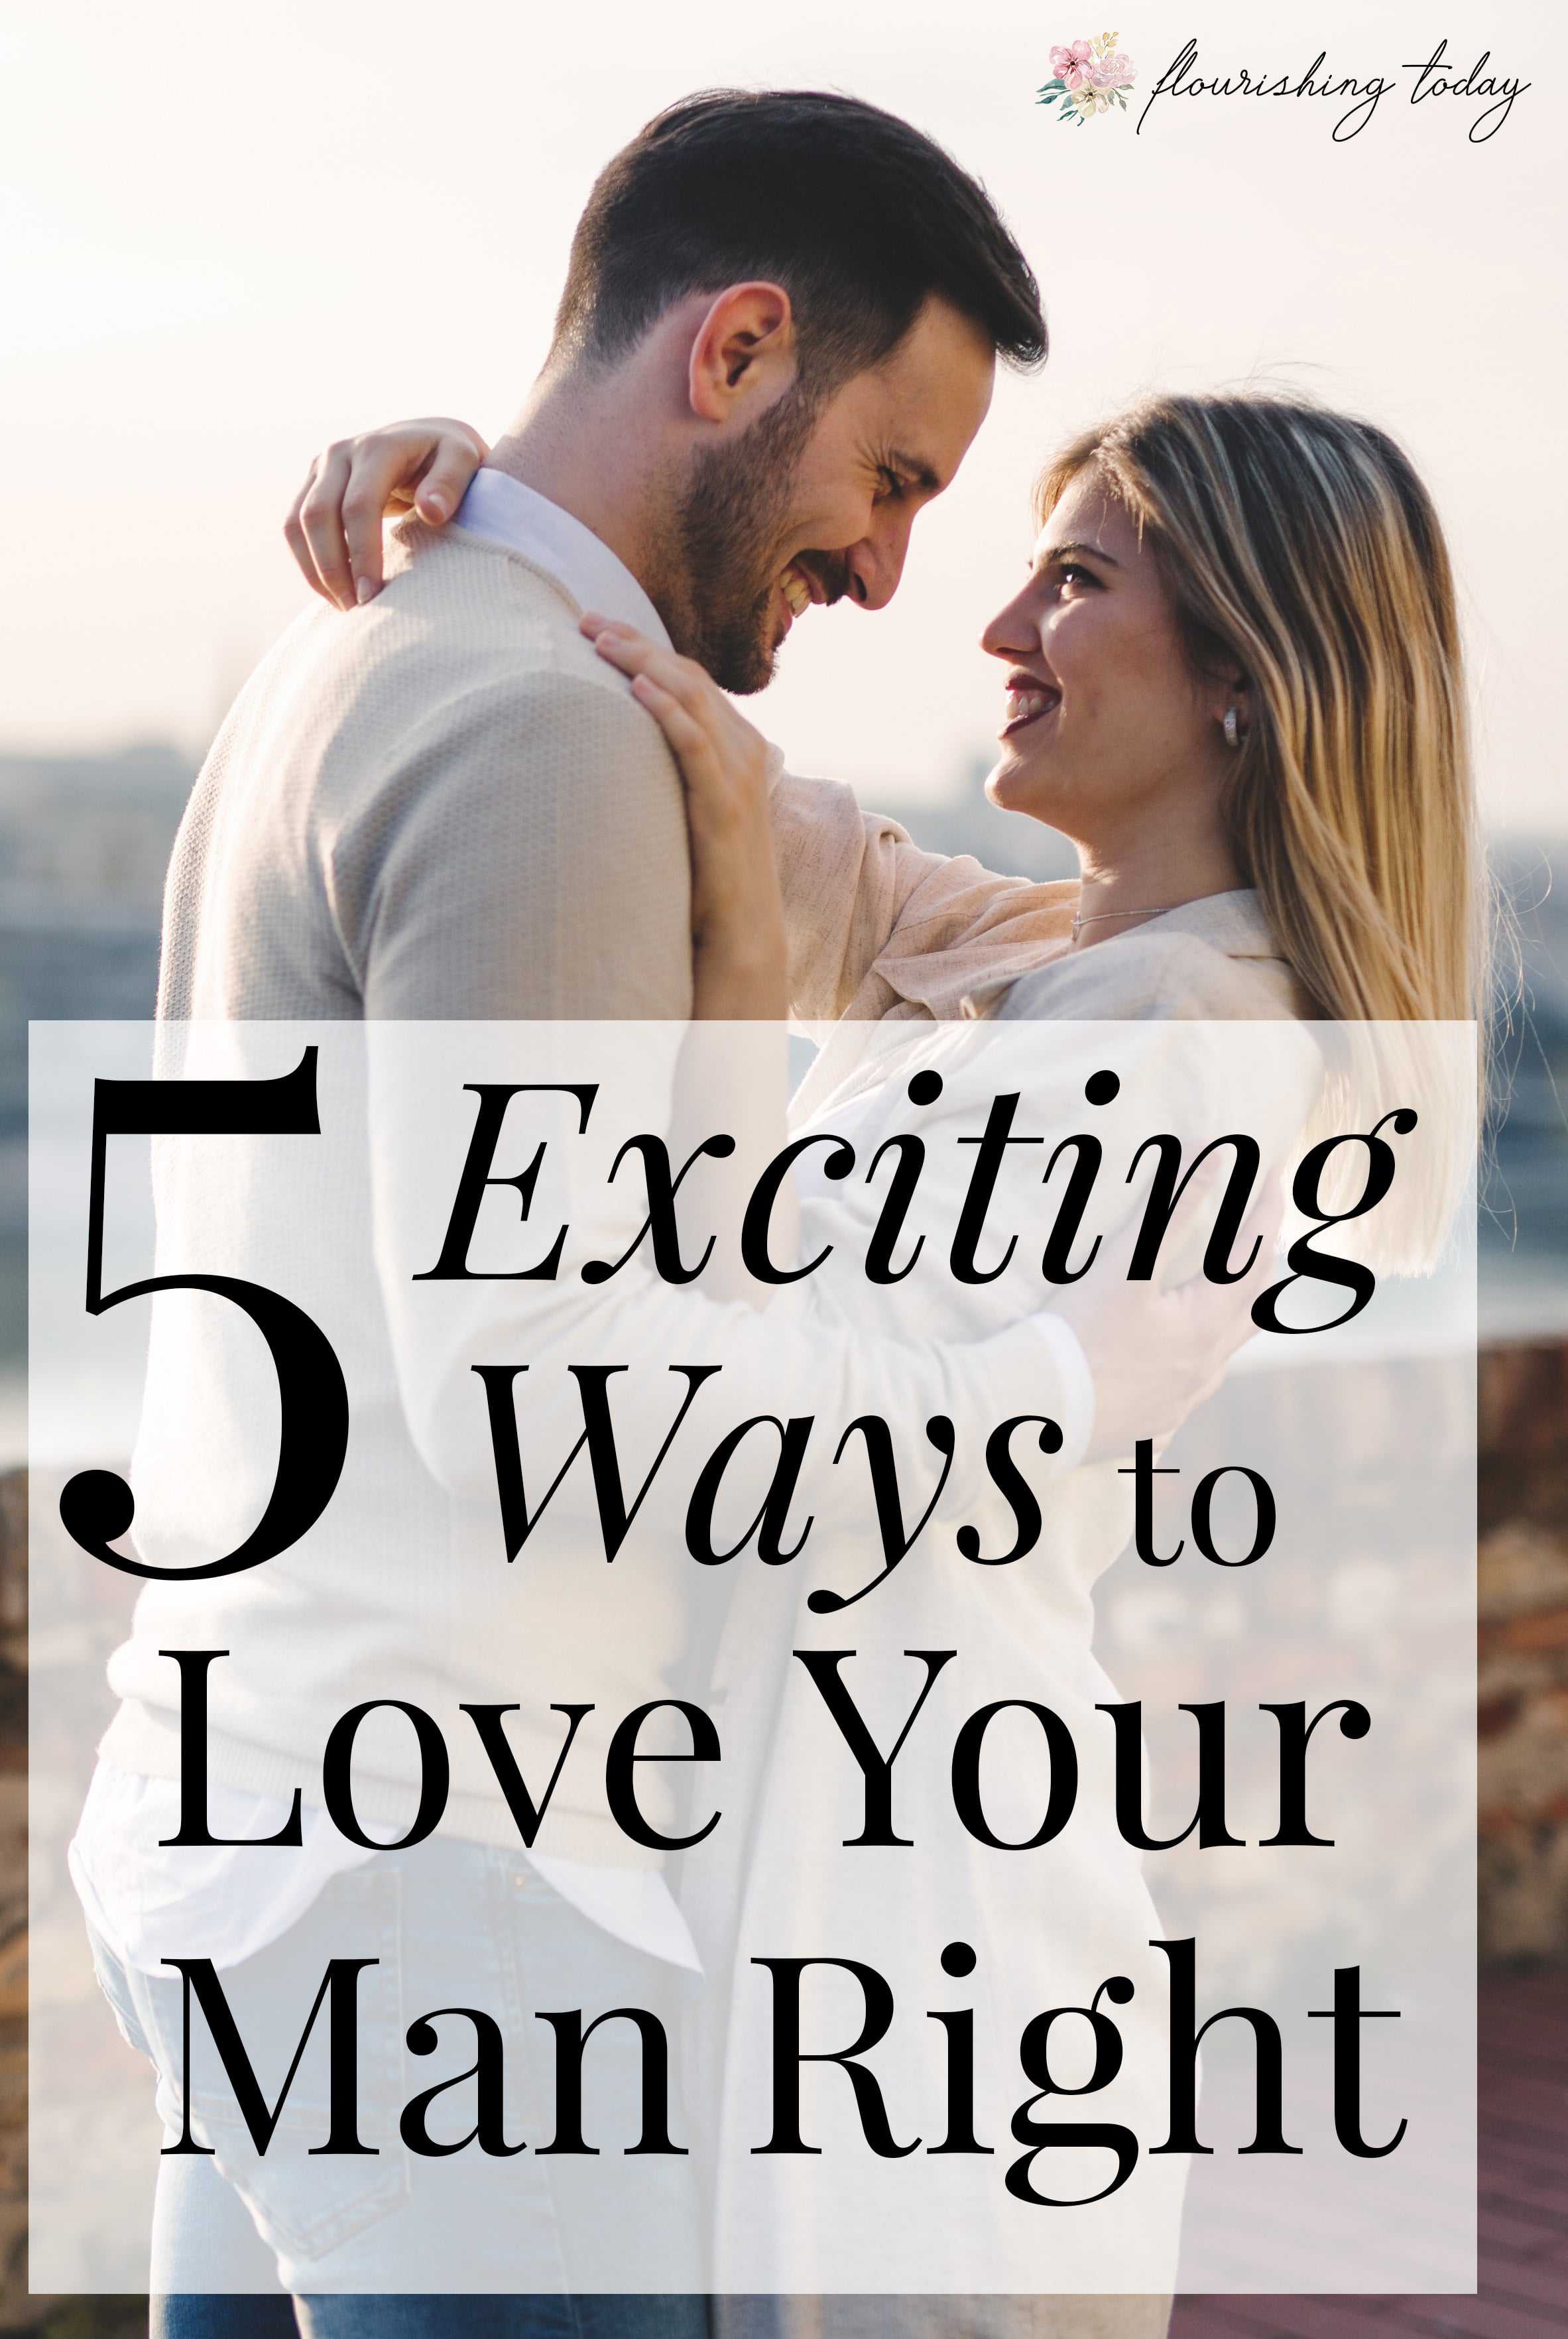 Do you want to love your man the way he wants to be loved? The relationship with your husband is one of the most important ones. Yet sometimes we don't know how to love them well. In this article you'll find 5 exciting ways to show your man love. #marriage #relationships #loveyourhusband #loveyourman